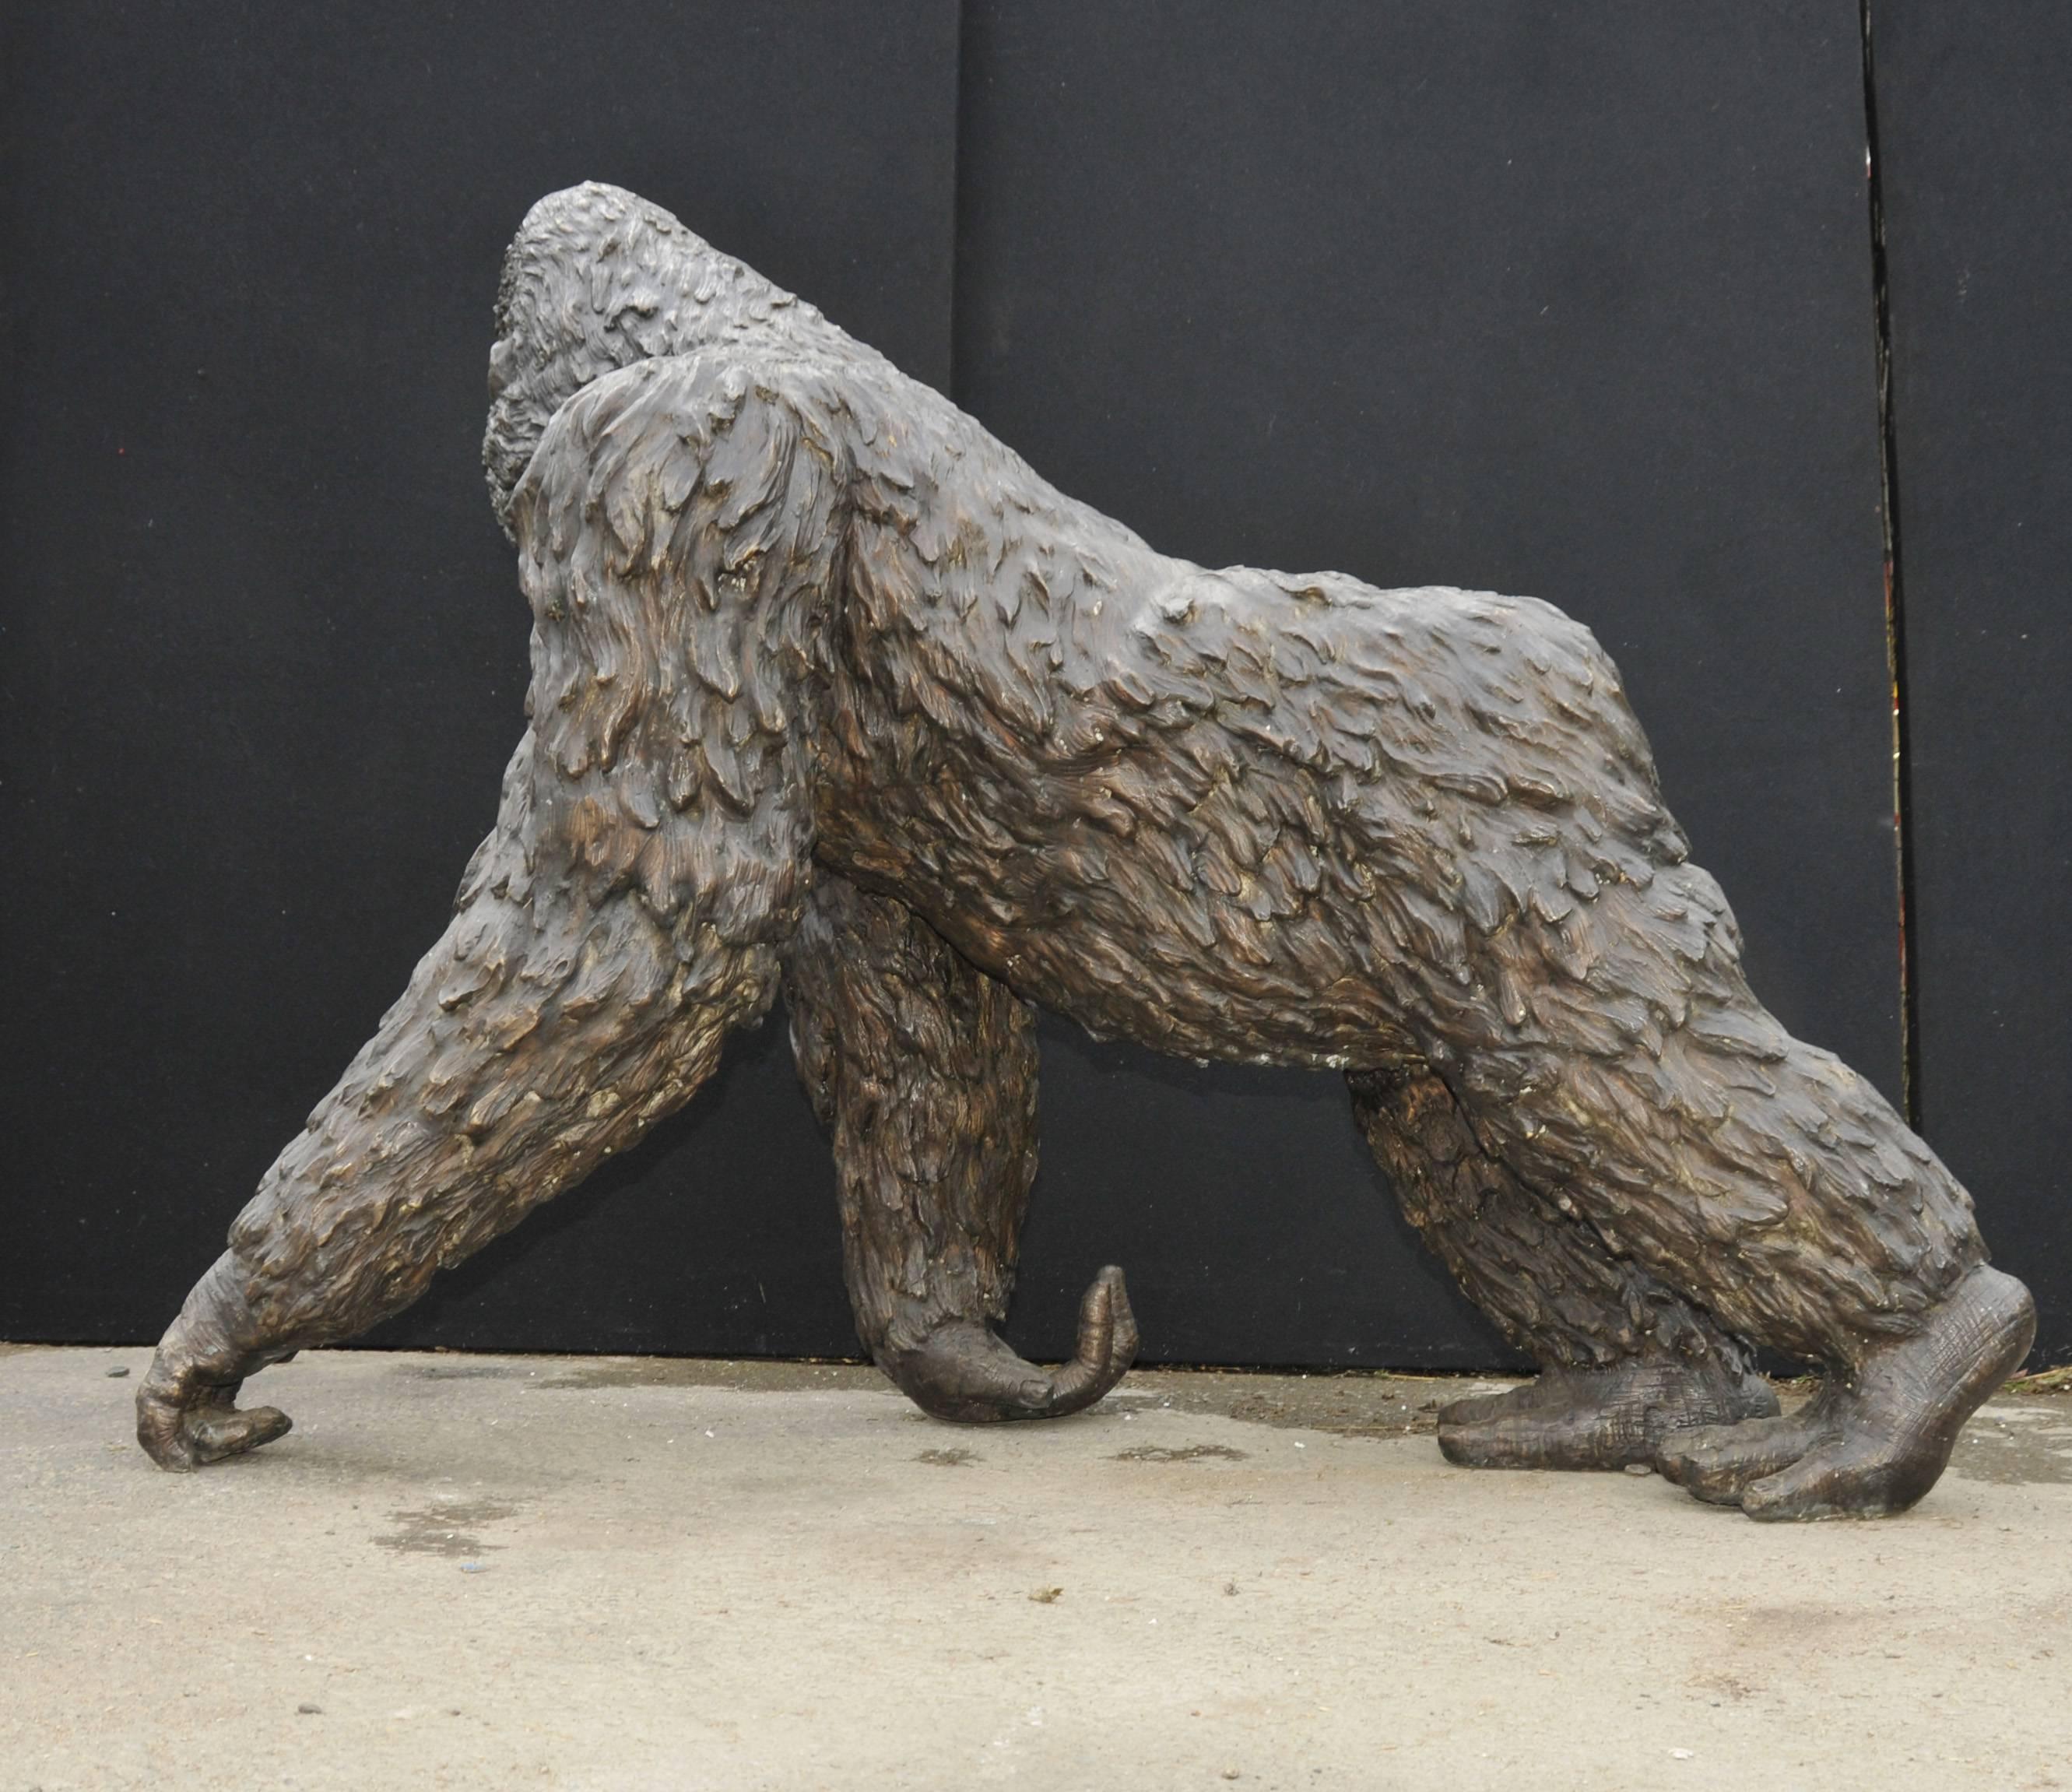 - Absolutely stunning almost lifesize bronze gorilla.
- If you are looking to start a bronze zoo then you\'ve found the right people!
- Artist has really captured the beauty of the beast with great skill.
- Depicted standing almost upright with a